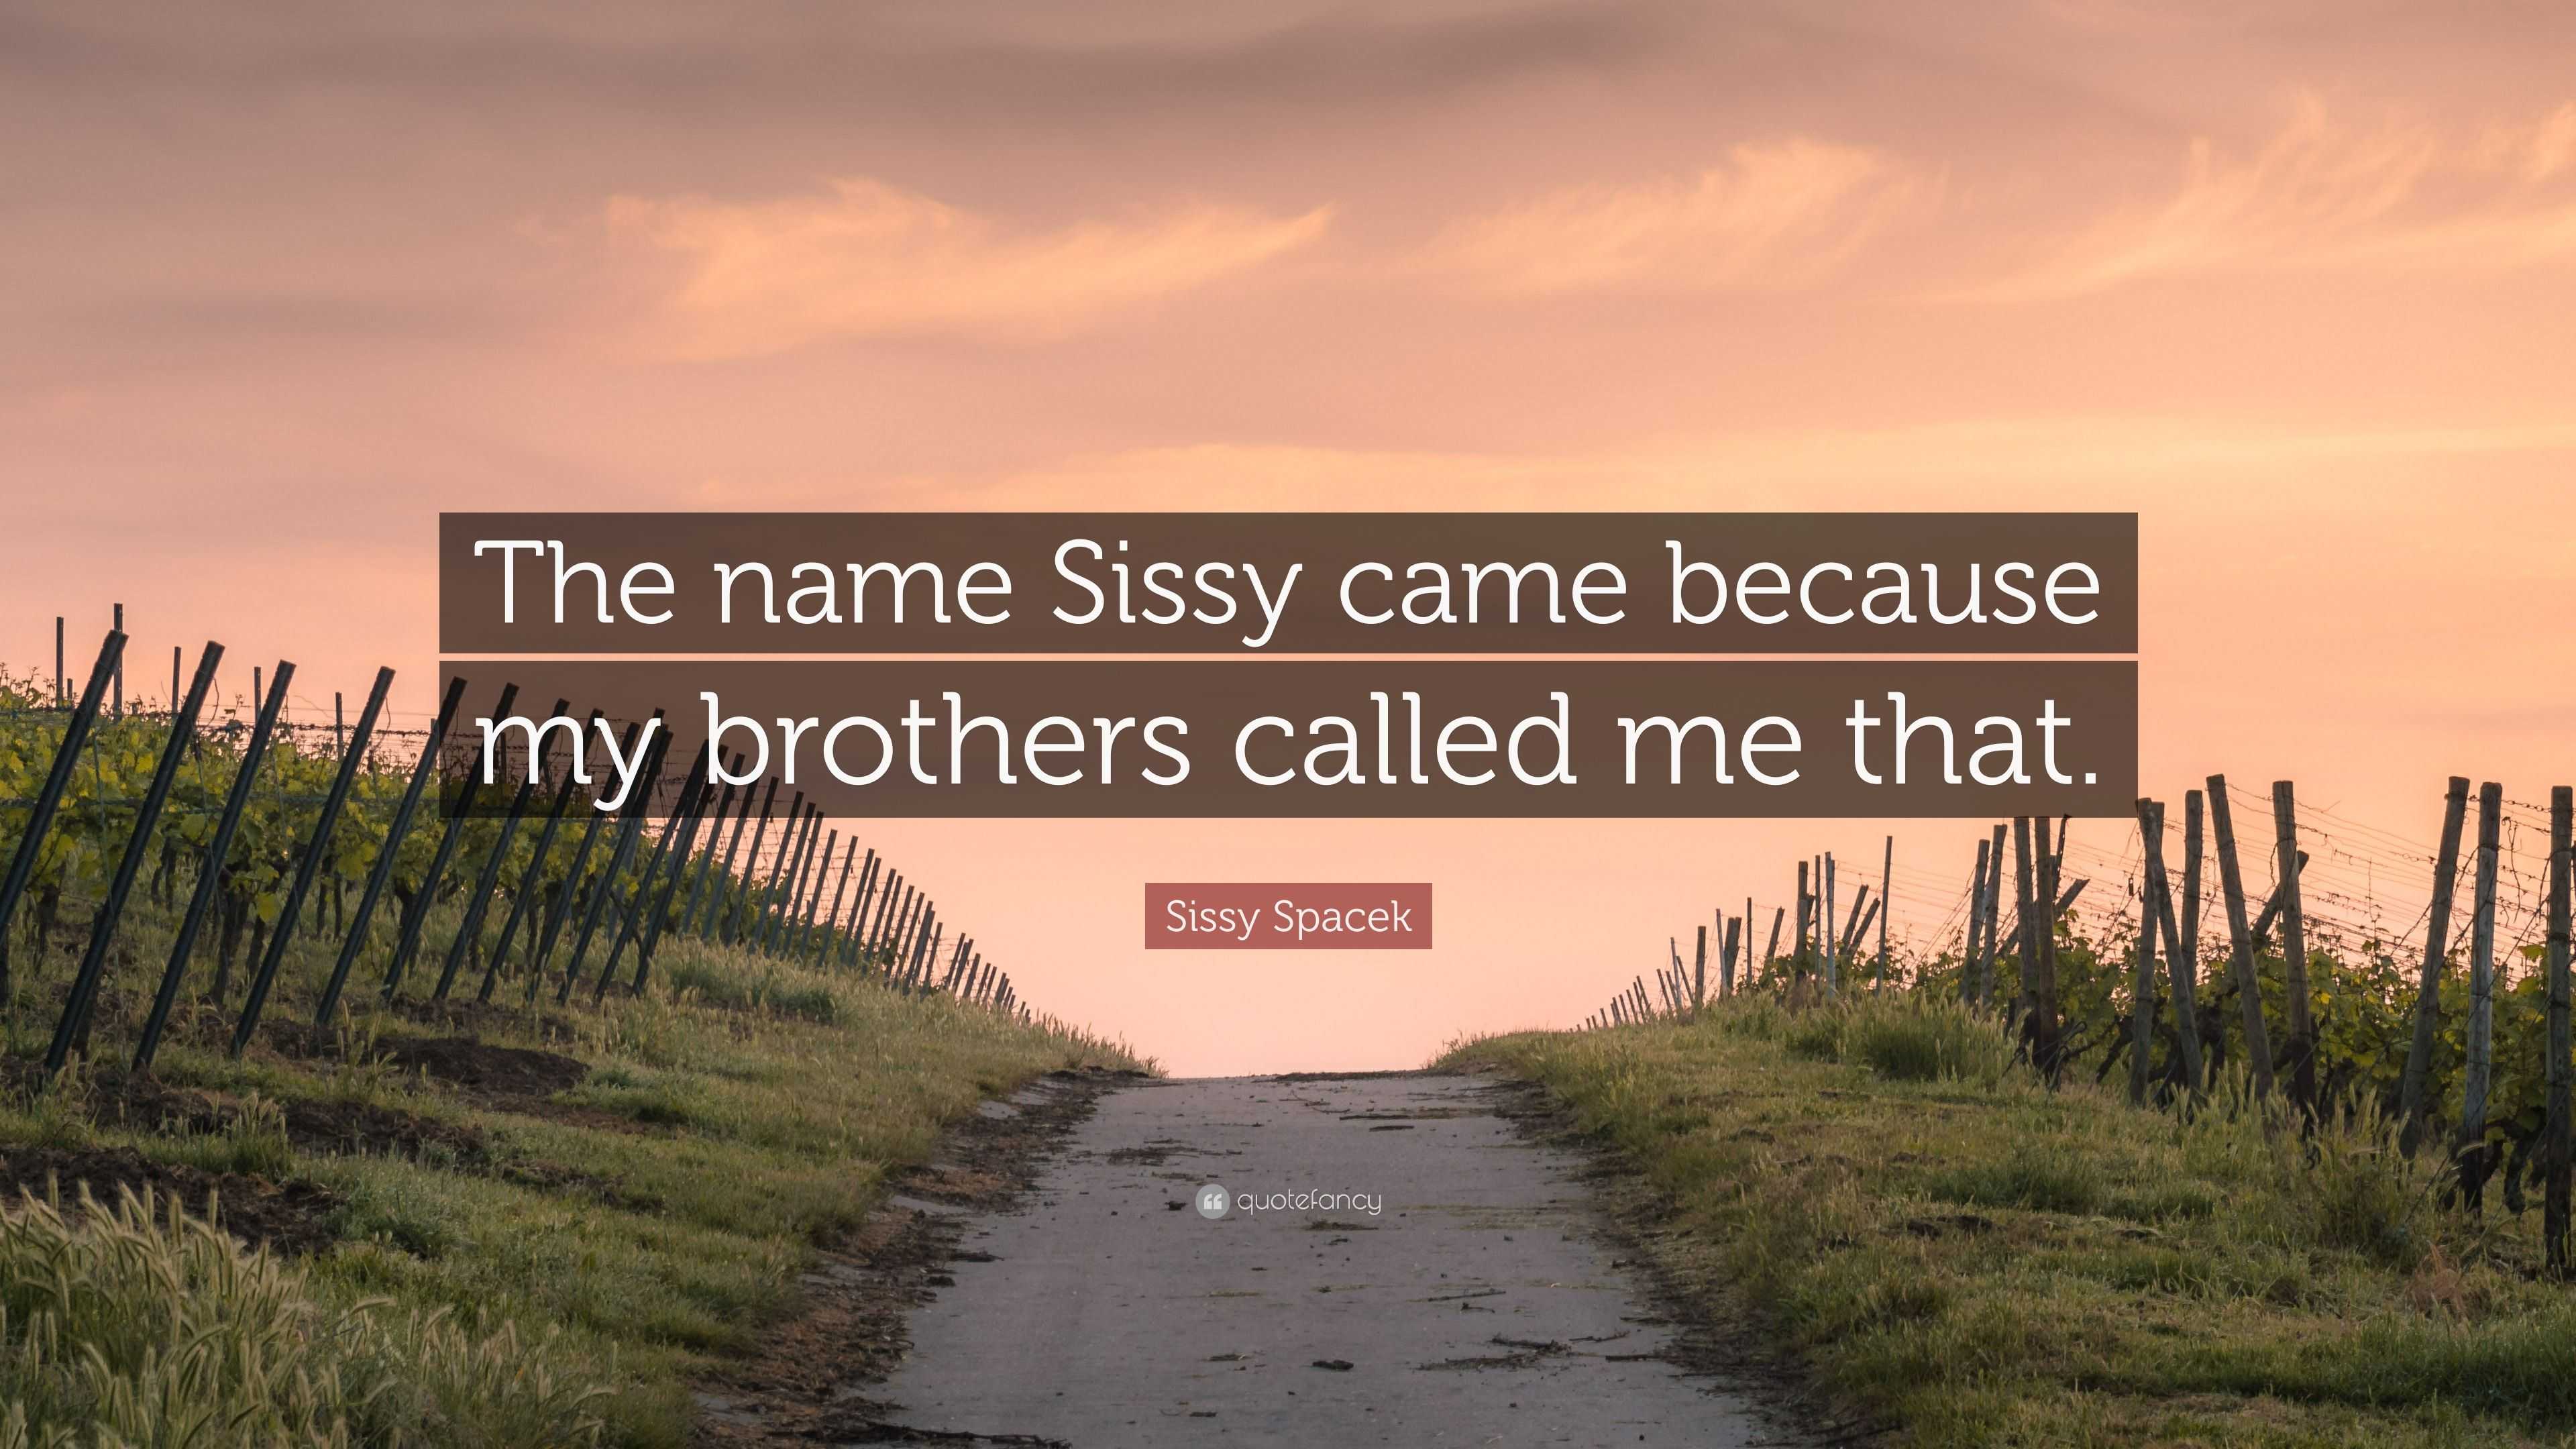 Brother Names